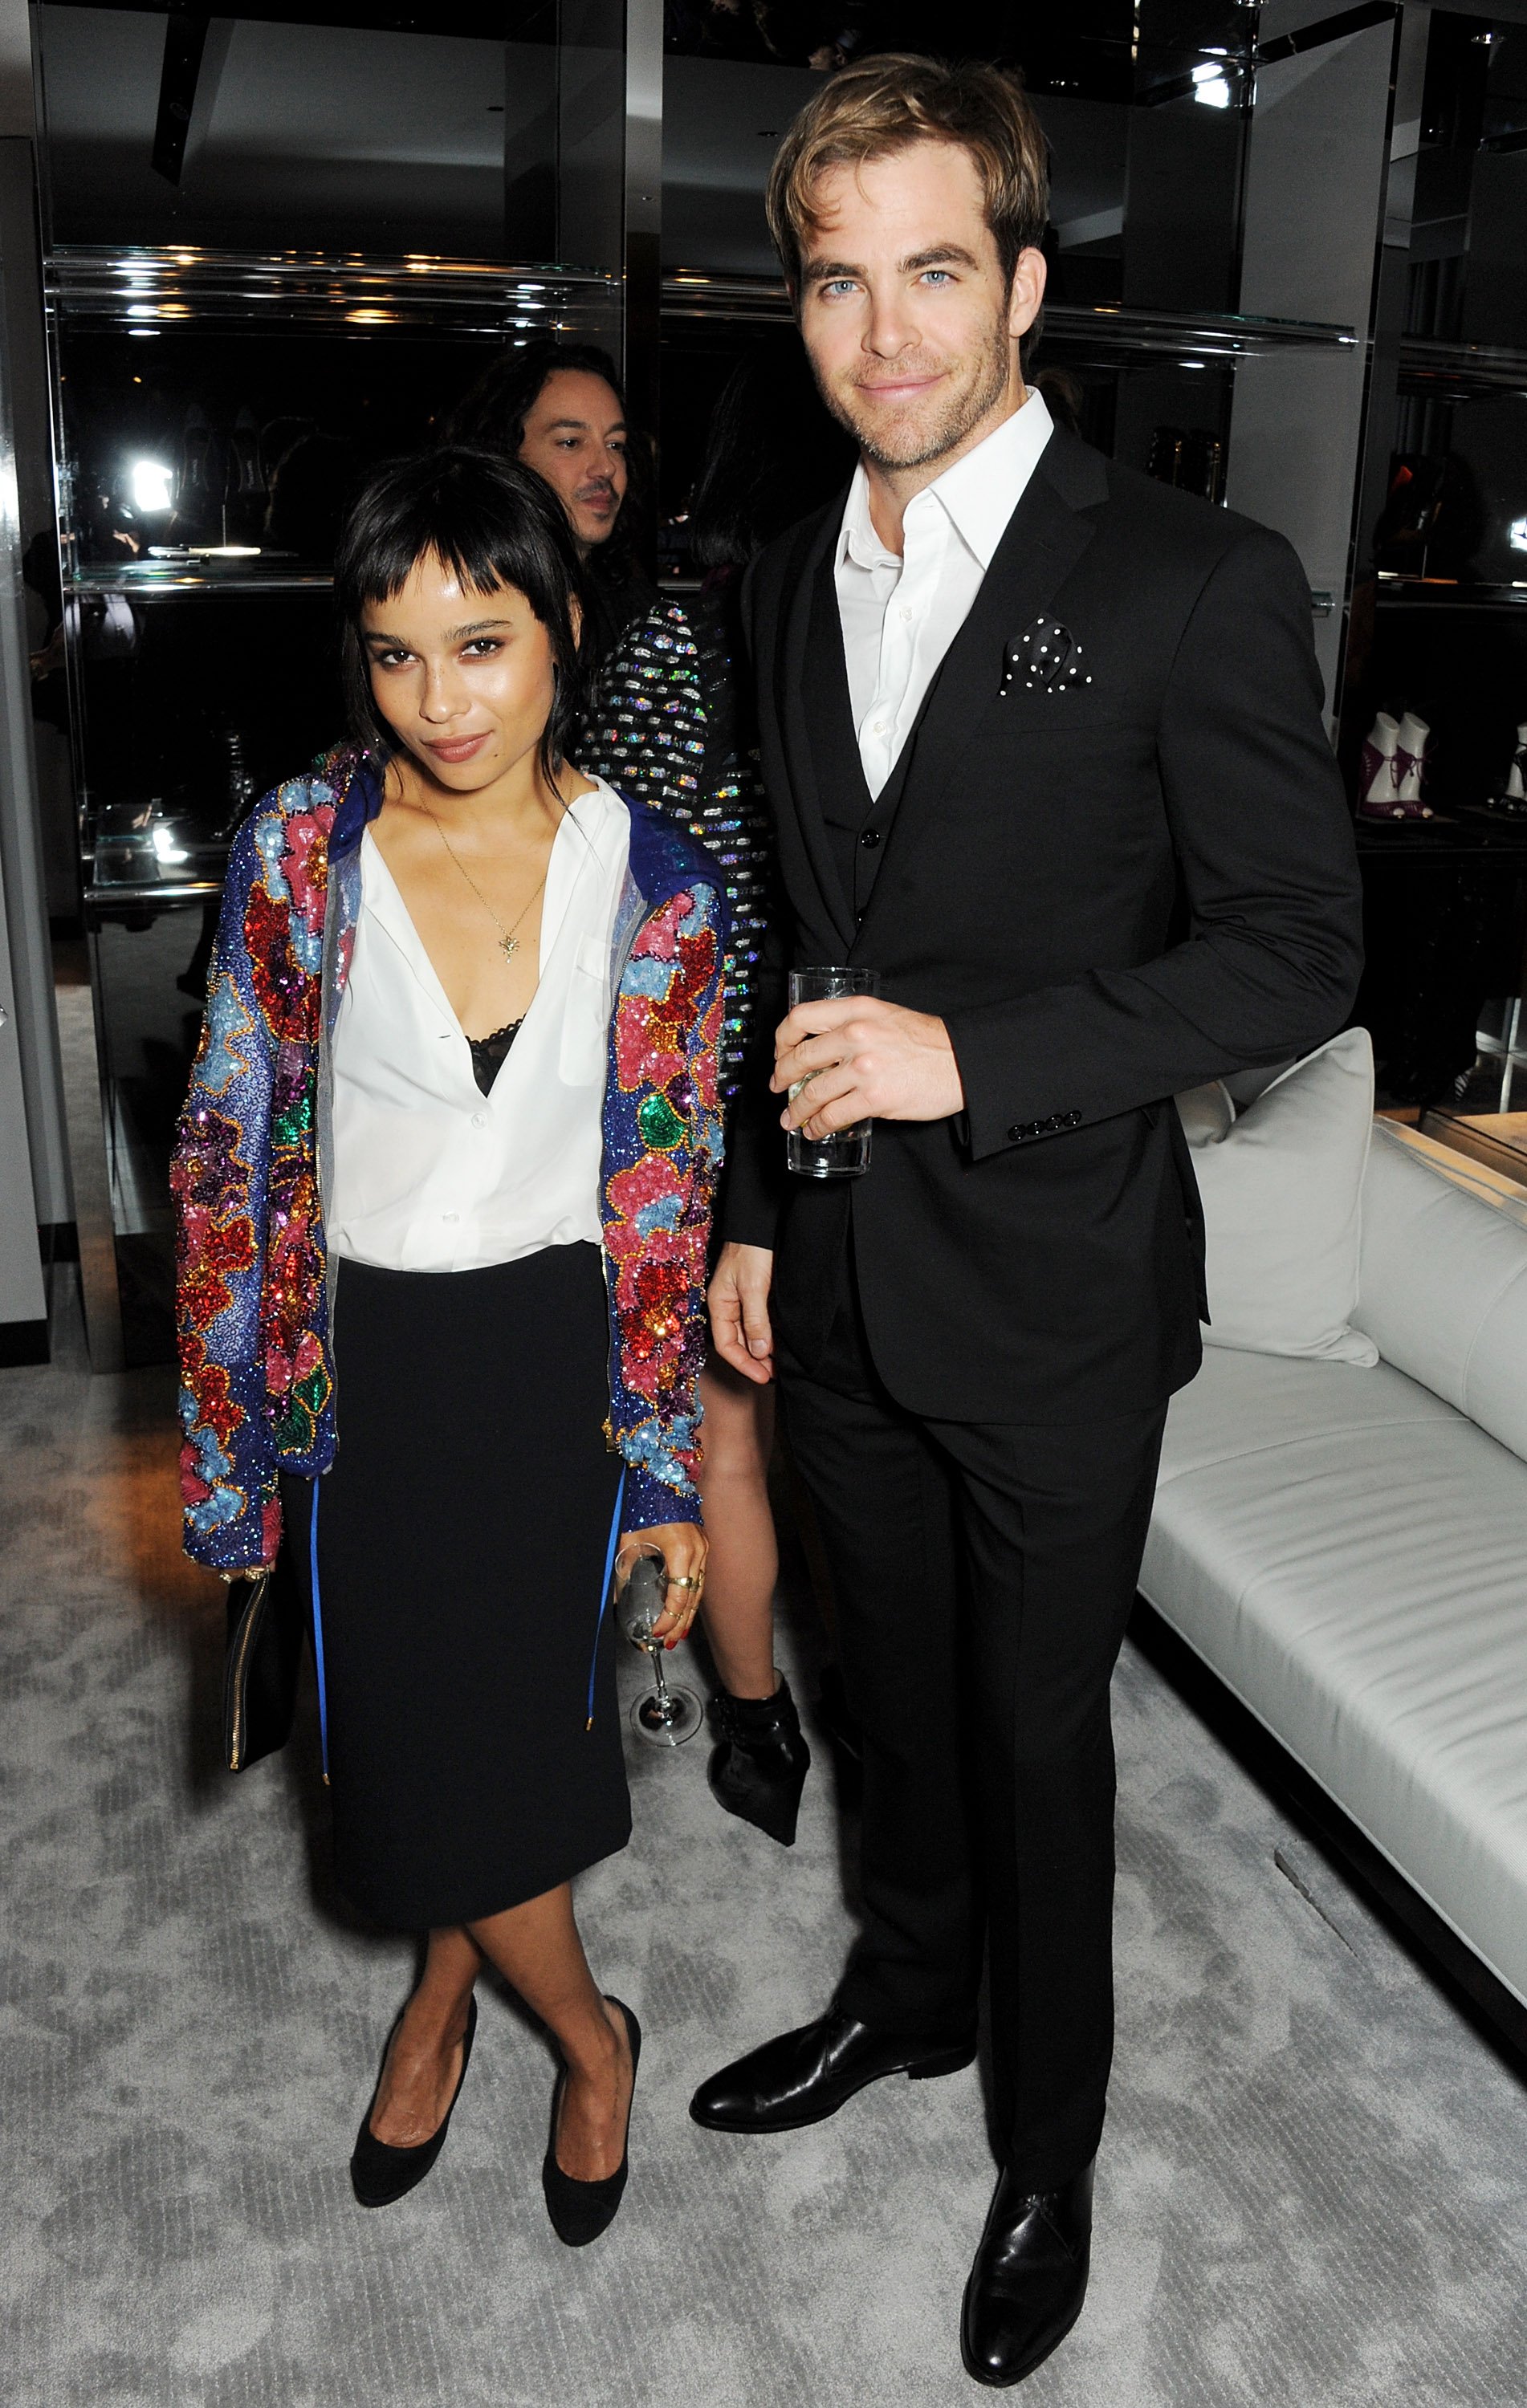 Zoe Kravitz and Chris Pine are posing at the Tom Ford London flagship store launch on Sloane Street in England | Source: Getty Images